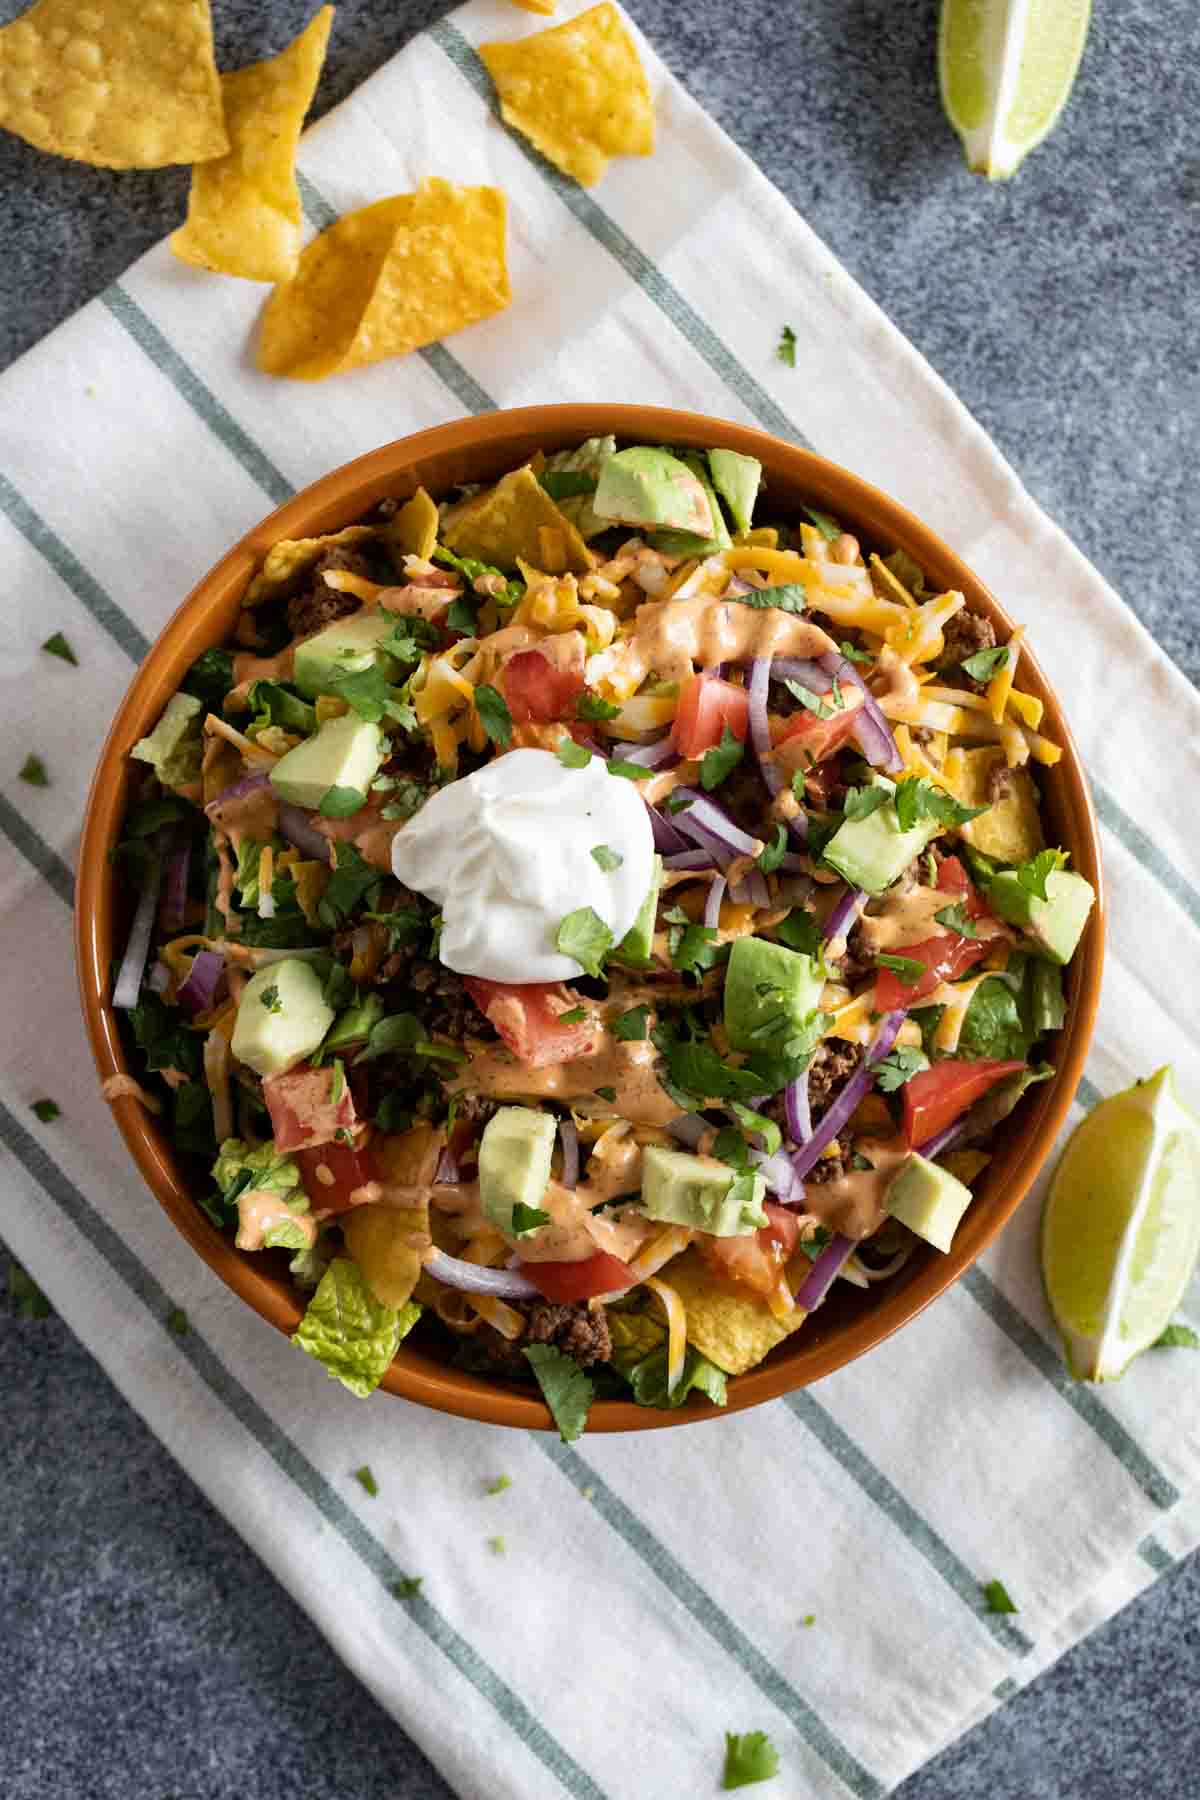 Taco Salad topped with lots of toppings and tortilla chips